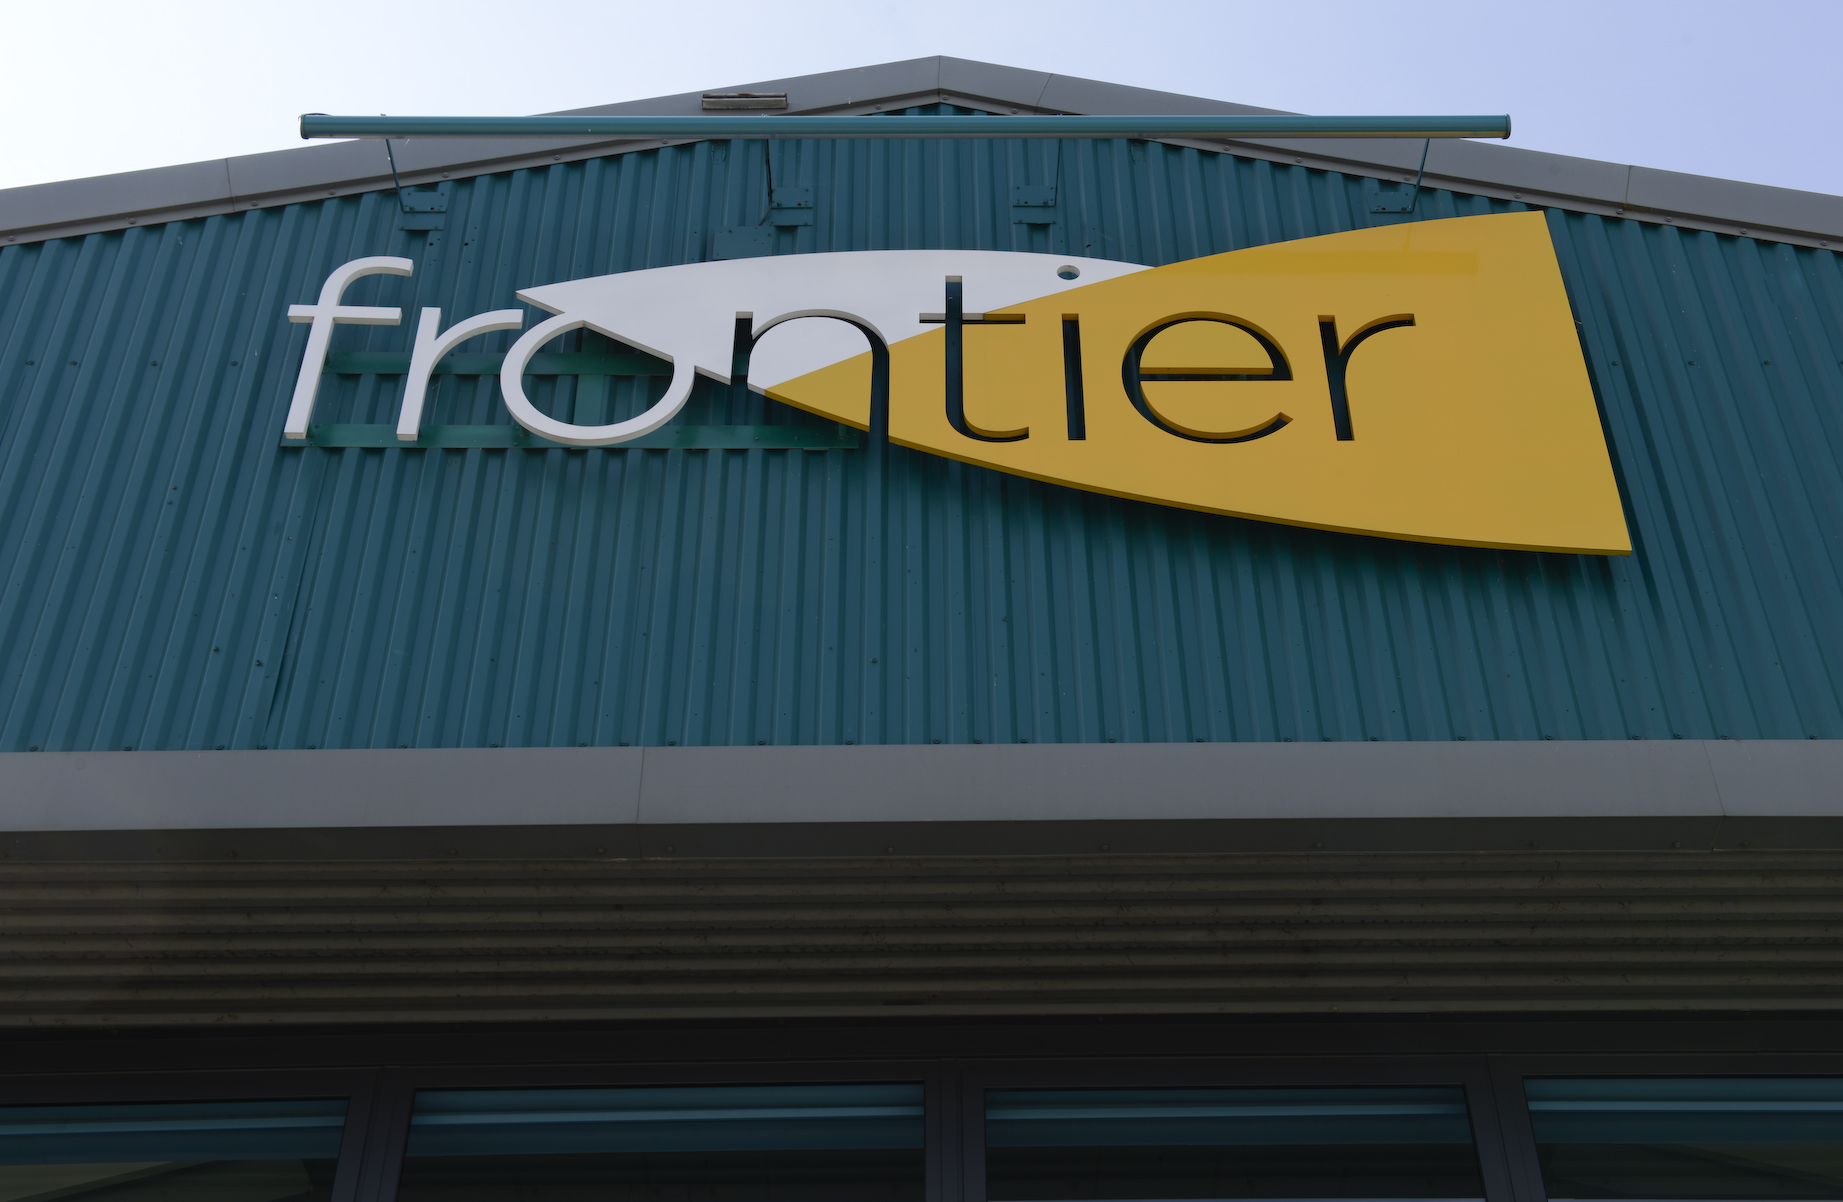 Frontier signage-1206